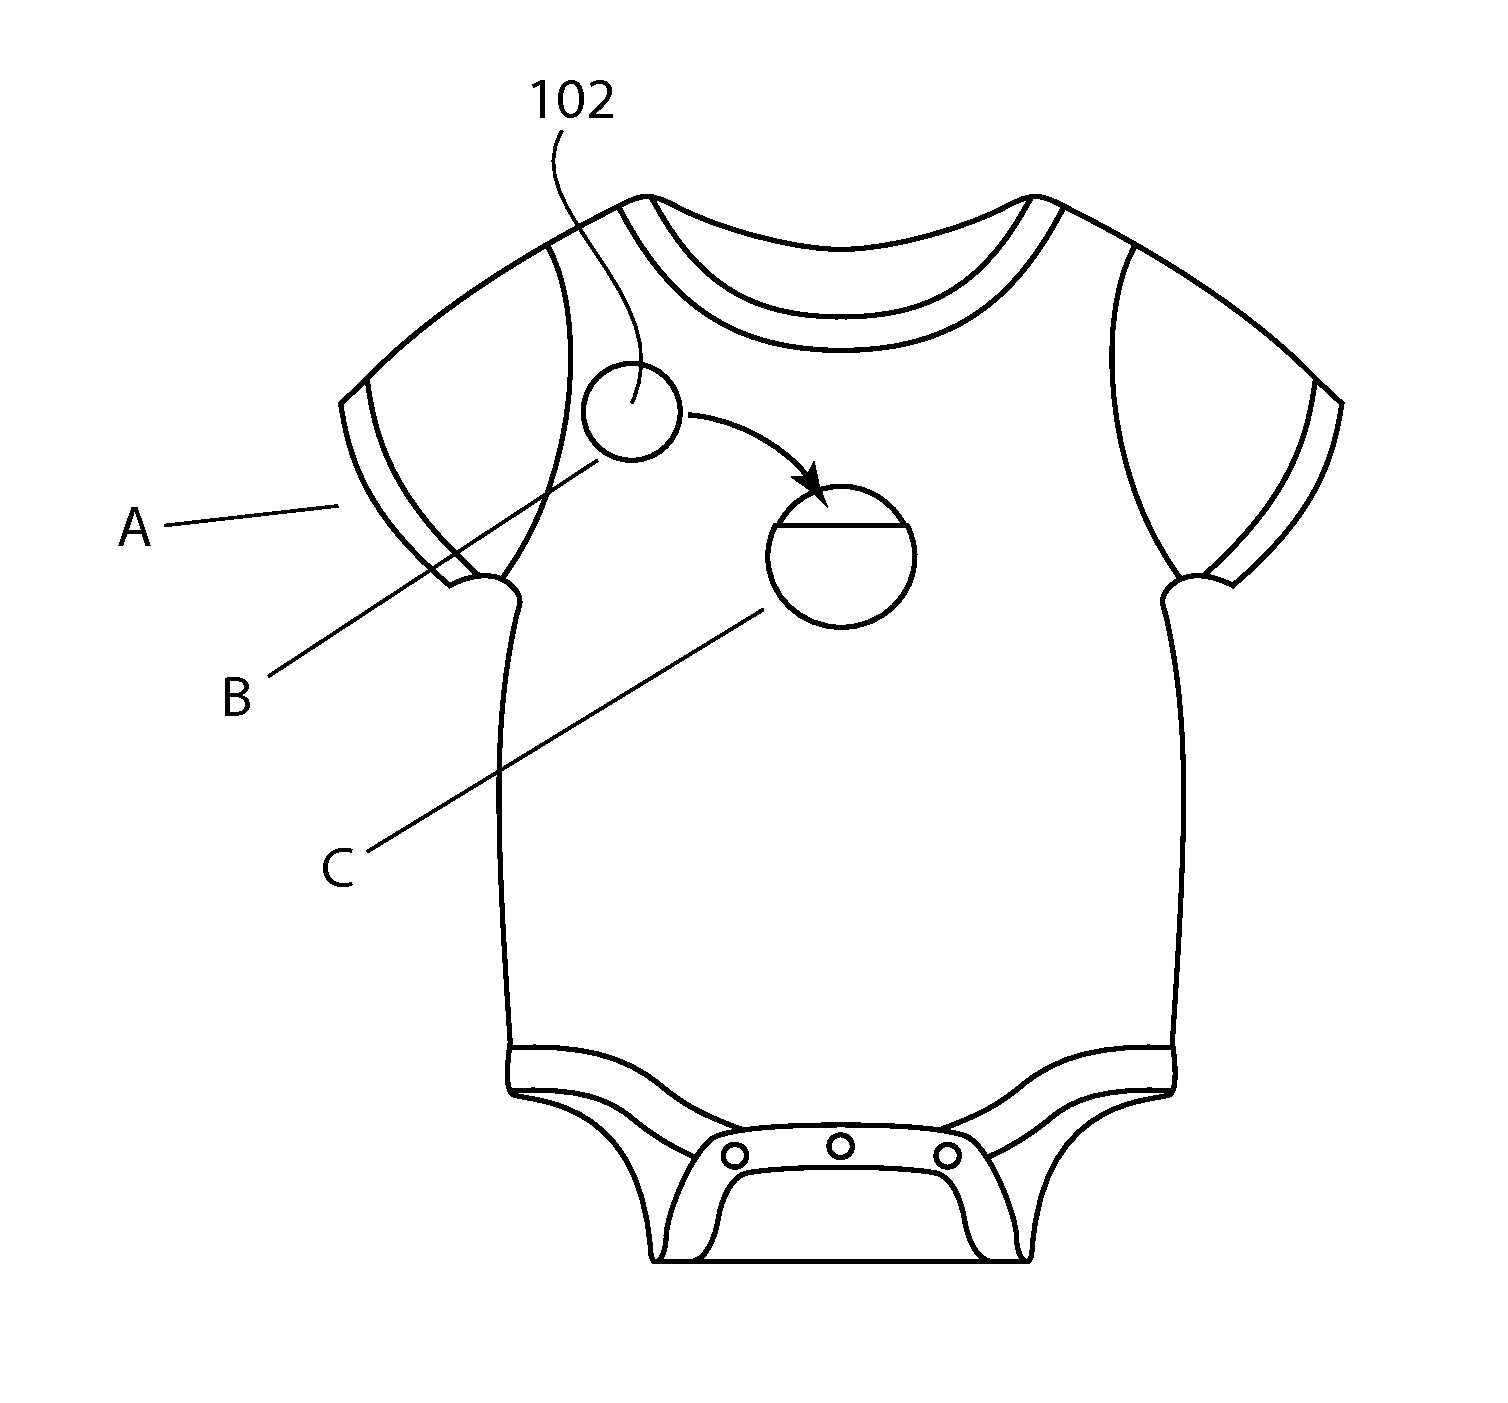 Subject motion monitoring, temperature monitoring, data gathering and analytics system and method